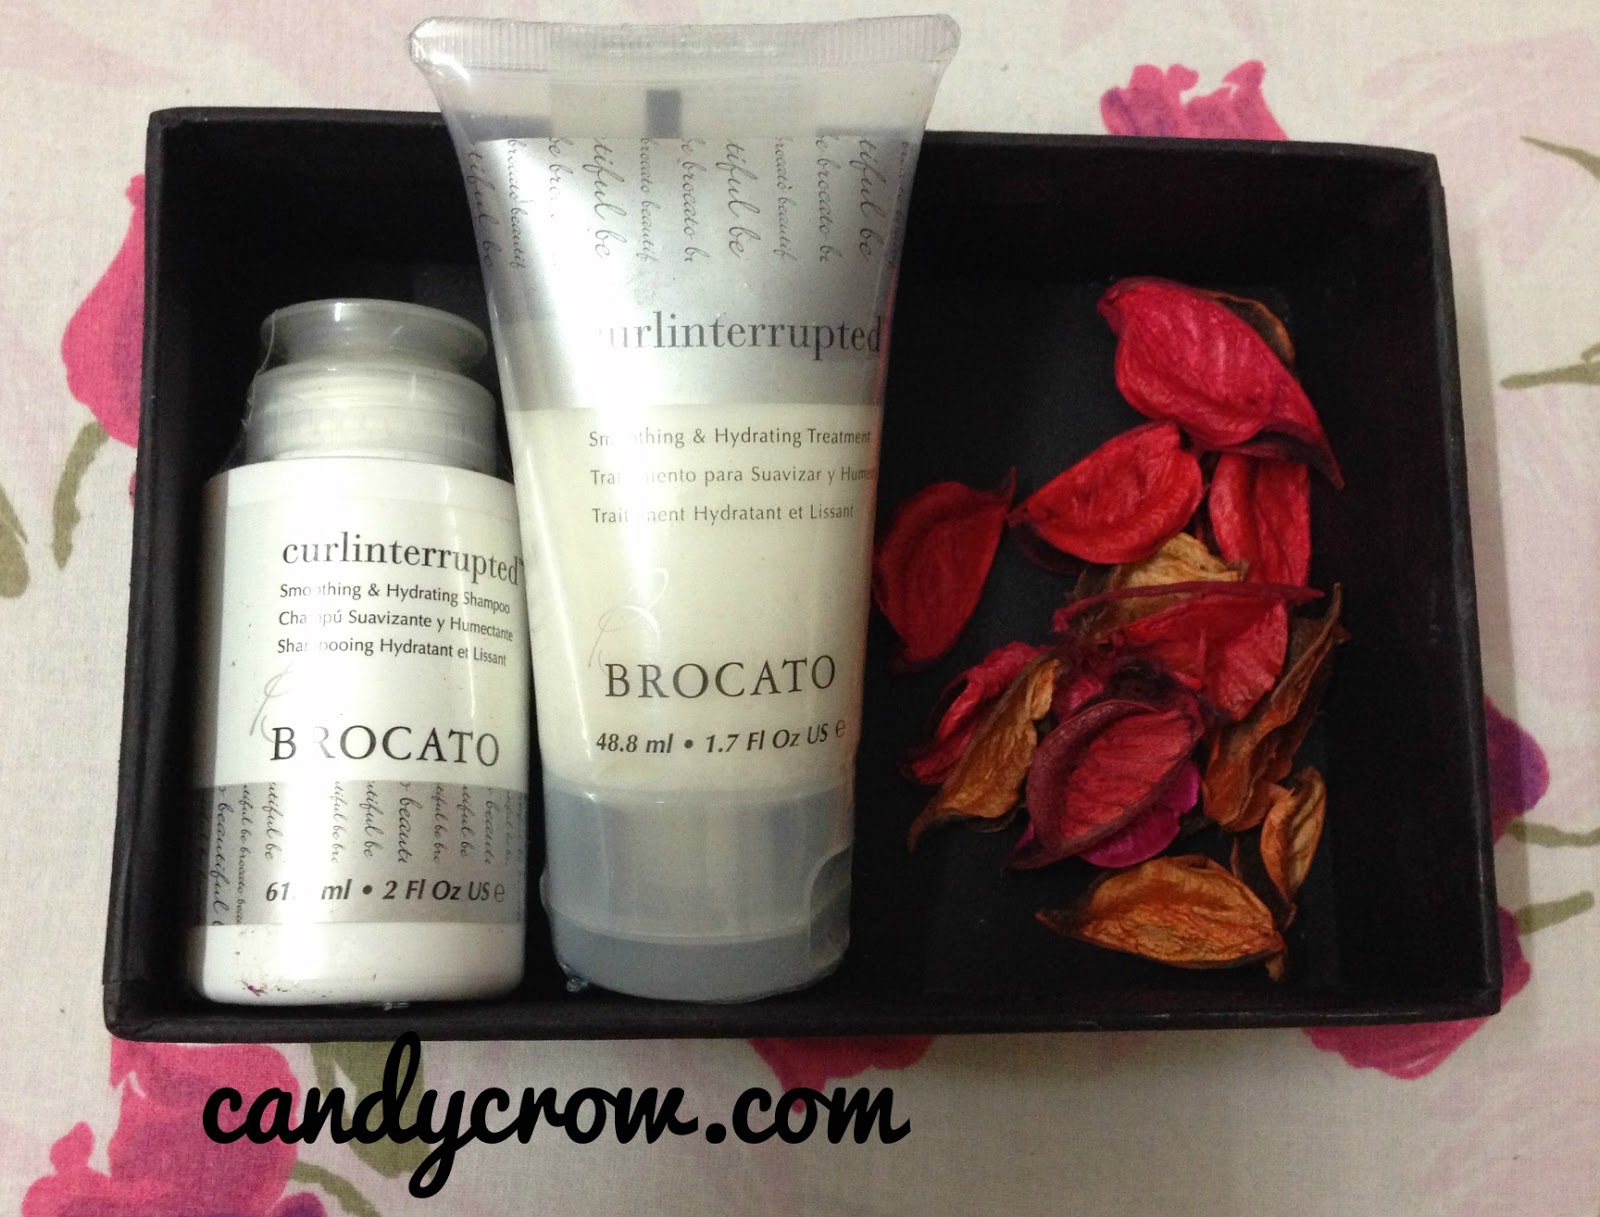 Brocato Curlinterrupted Shampoo and conditioner Review